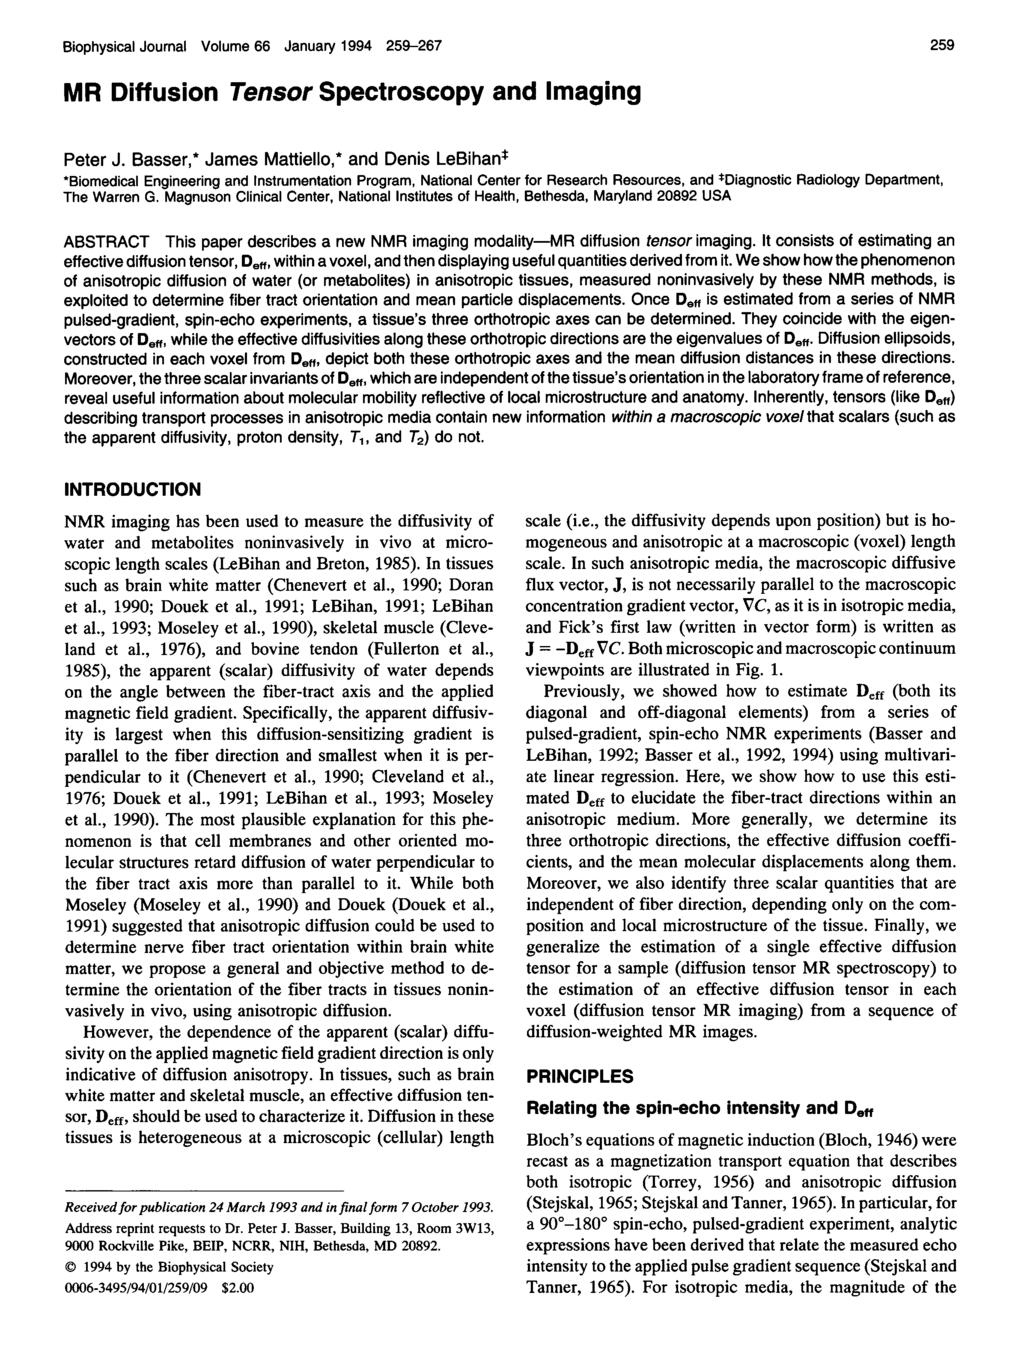 Biophysical Journal Volume 66 January 1994 259-267 MR Diffusion Tensor Spectroscopy and Imaging 259 Peter J.